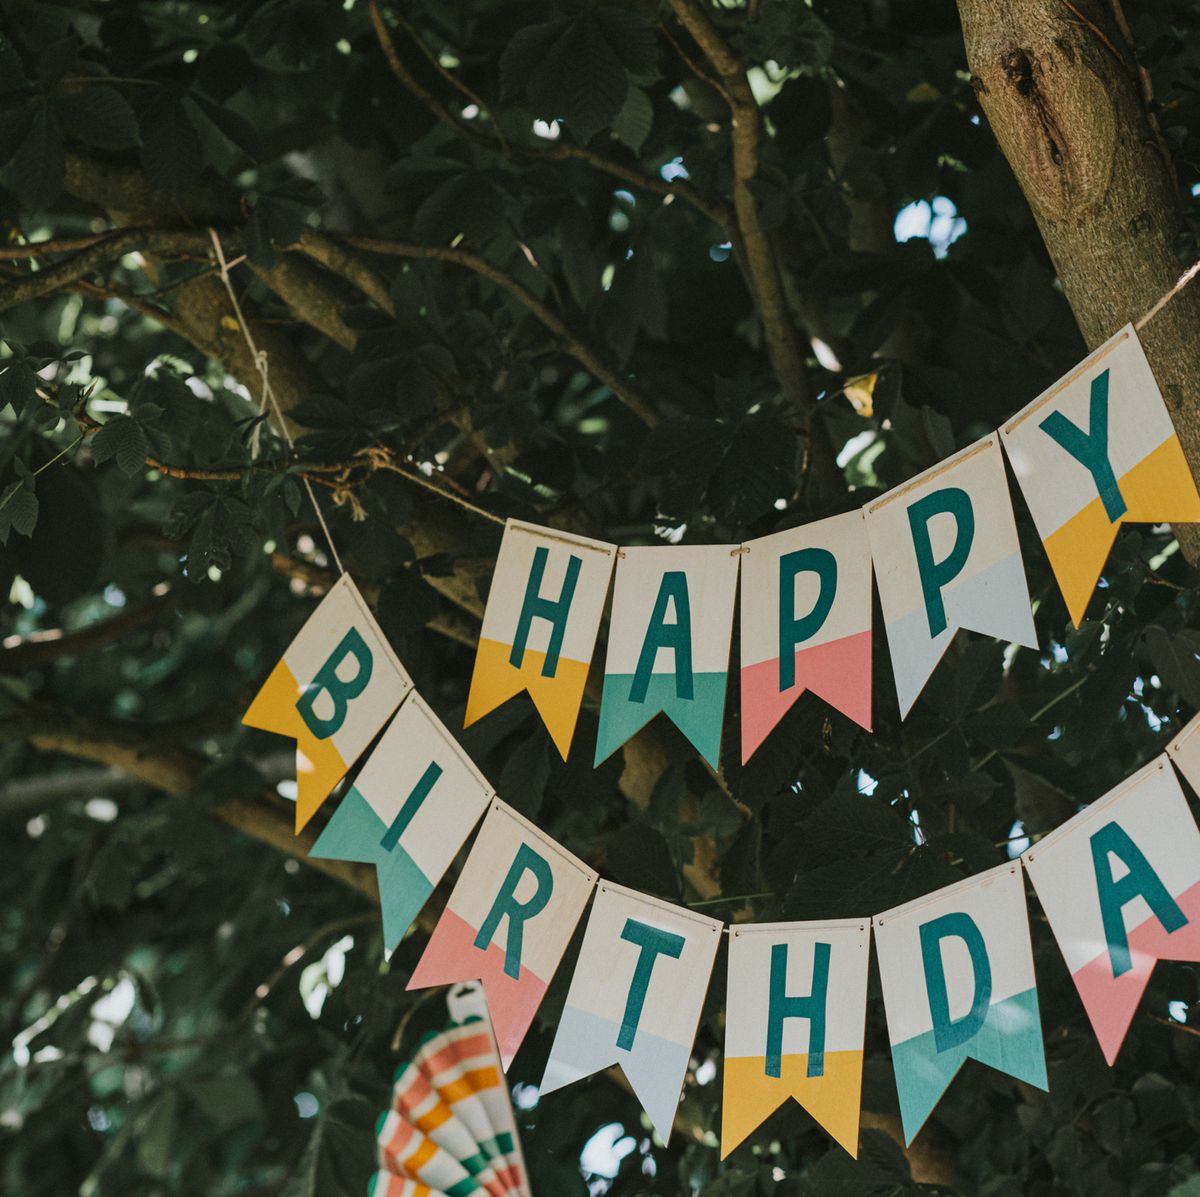 https://hips.hearstapps.com/hmg-prod/images/happy-birthday-banner-hangs-from-a-tree-royalty-free-image-1657296329.jpg?crop=0.668xw:1.00xh;0.276xw,0&resize=1200:*